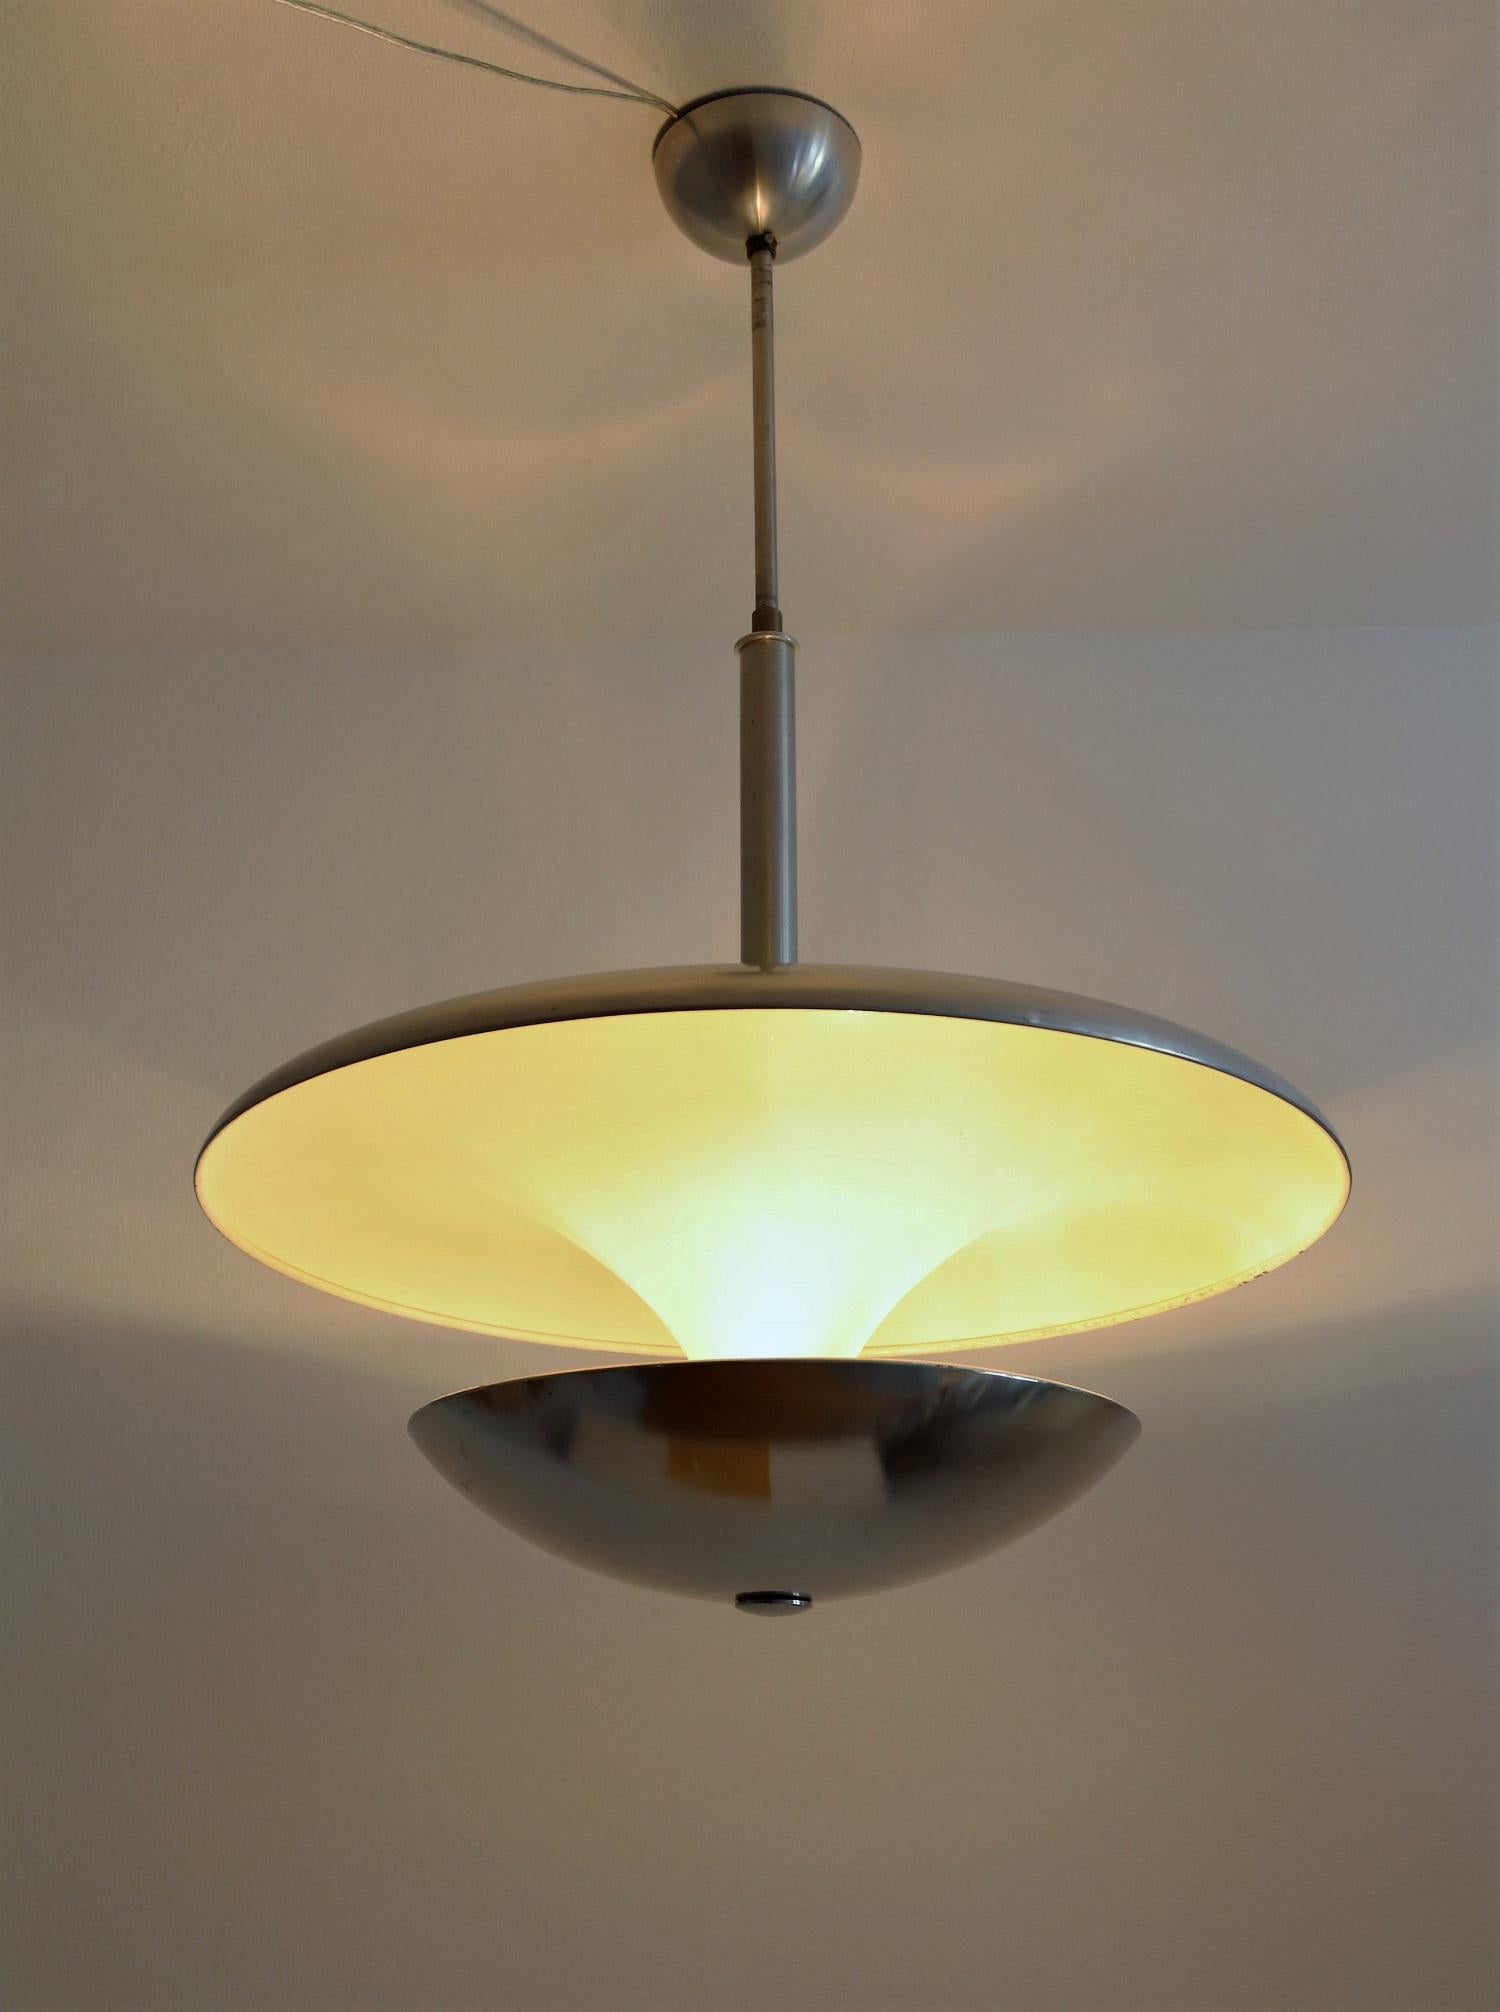 Magnificent chandelier made completely of aluminium during the Bauhaus period.
The upper big plate is down-going in a tulip shape, and on its bottom is fixed a round dome. It's varnished inside in cream white to reflect warm light when illuminated